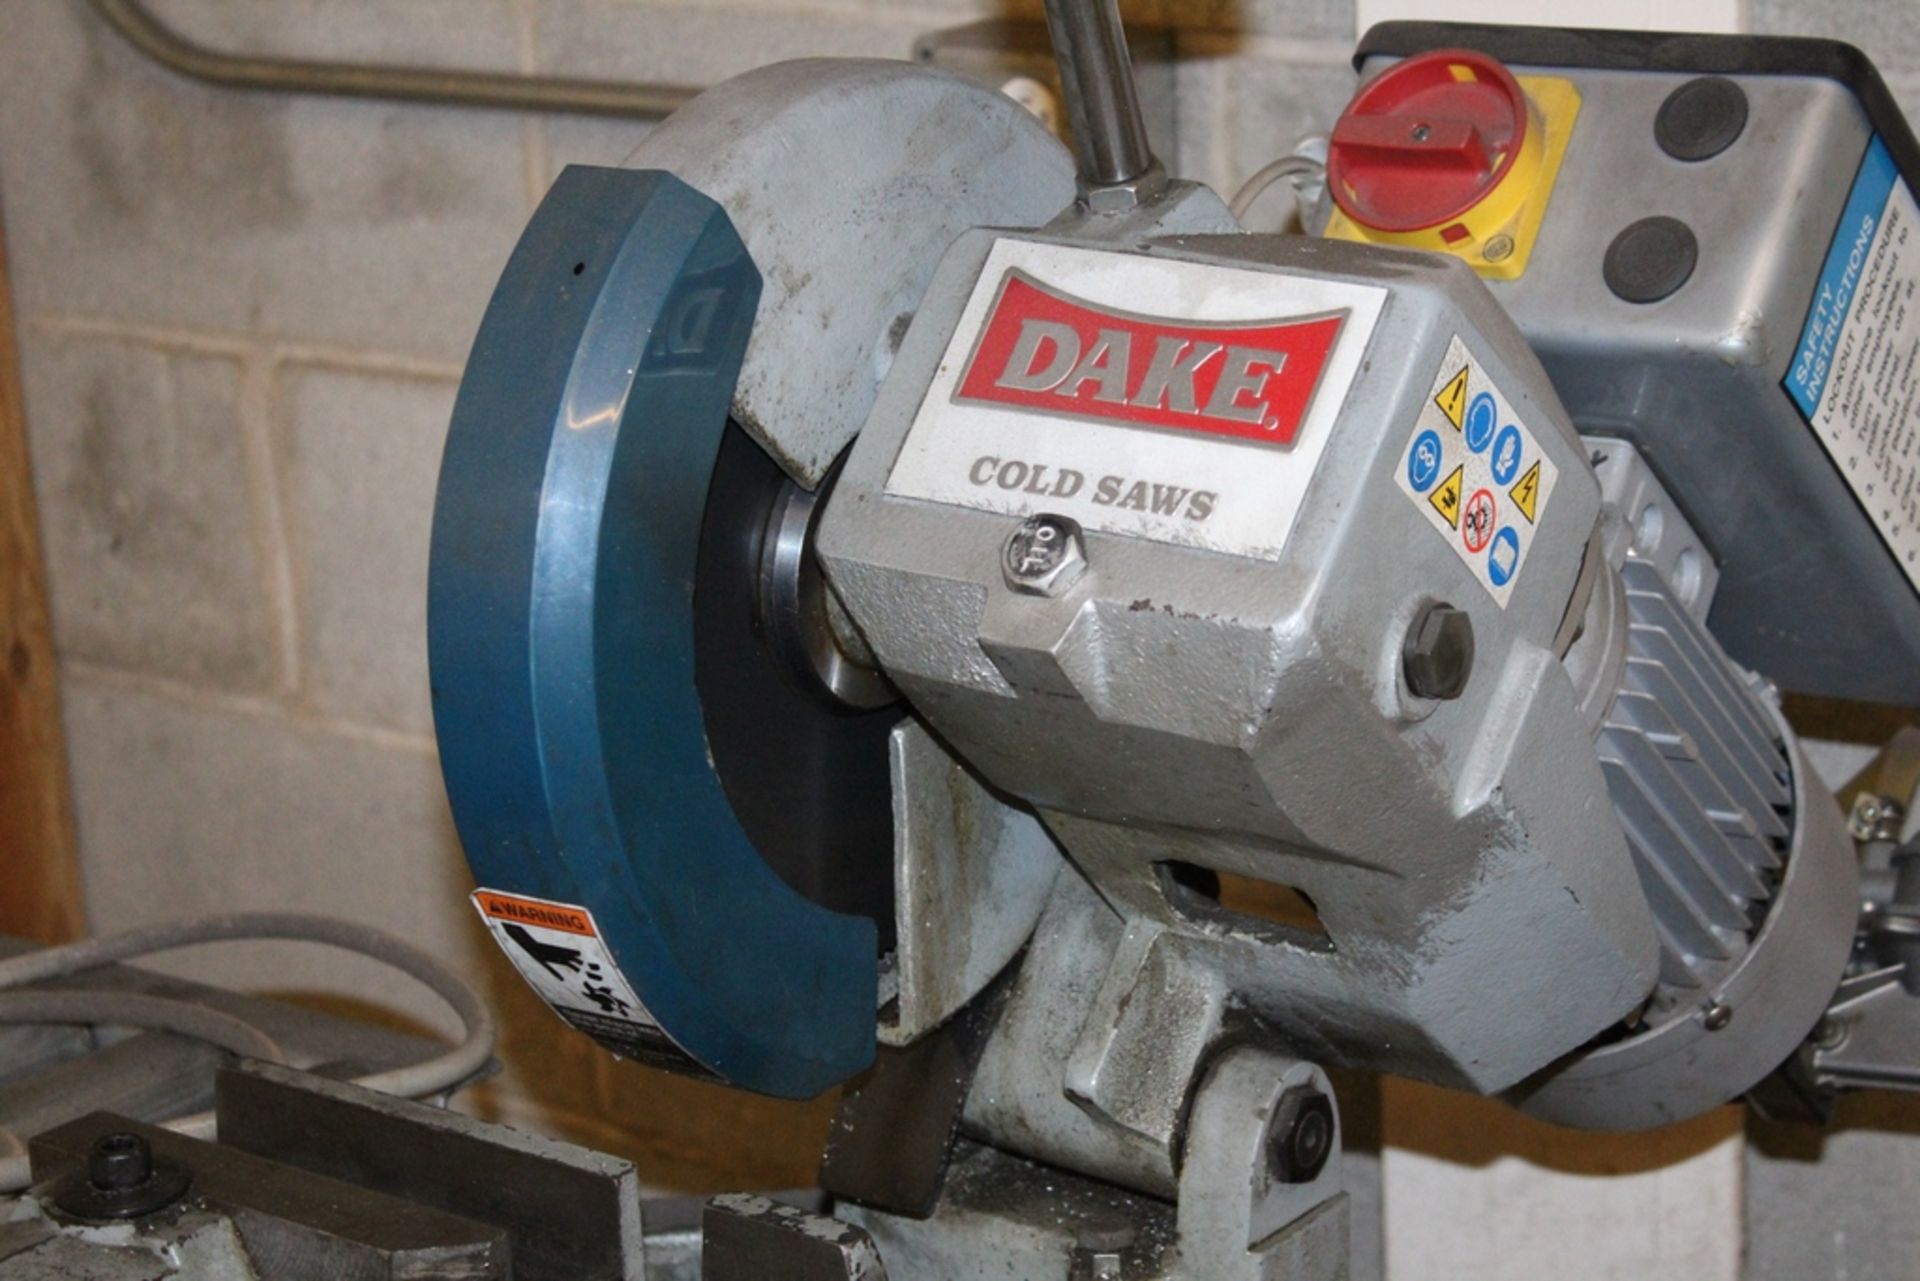 DAKE MODEL 250F COLD SAW, S/N 1062711, WITH INFEED/OUT ROLLER CONVEYOR - Image 2 of 4